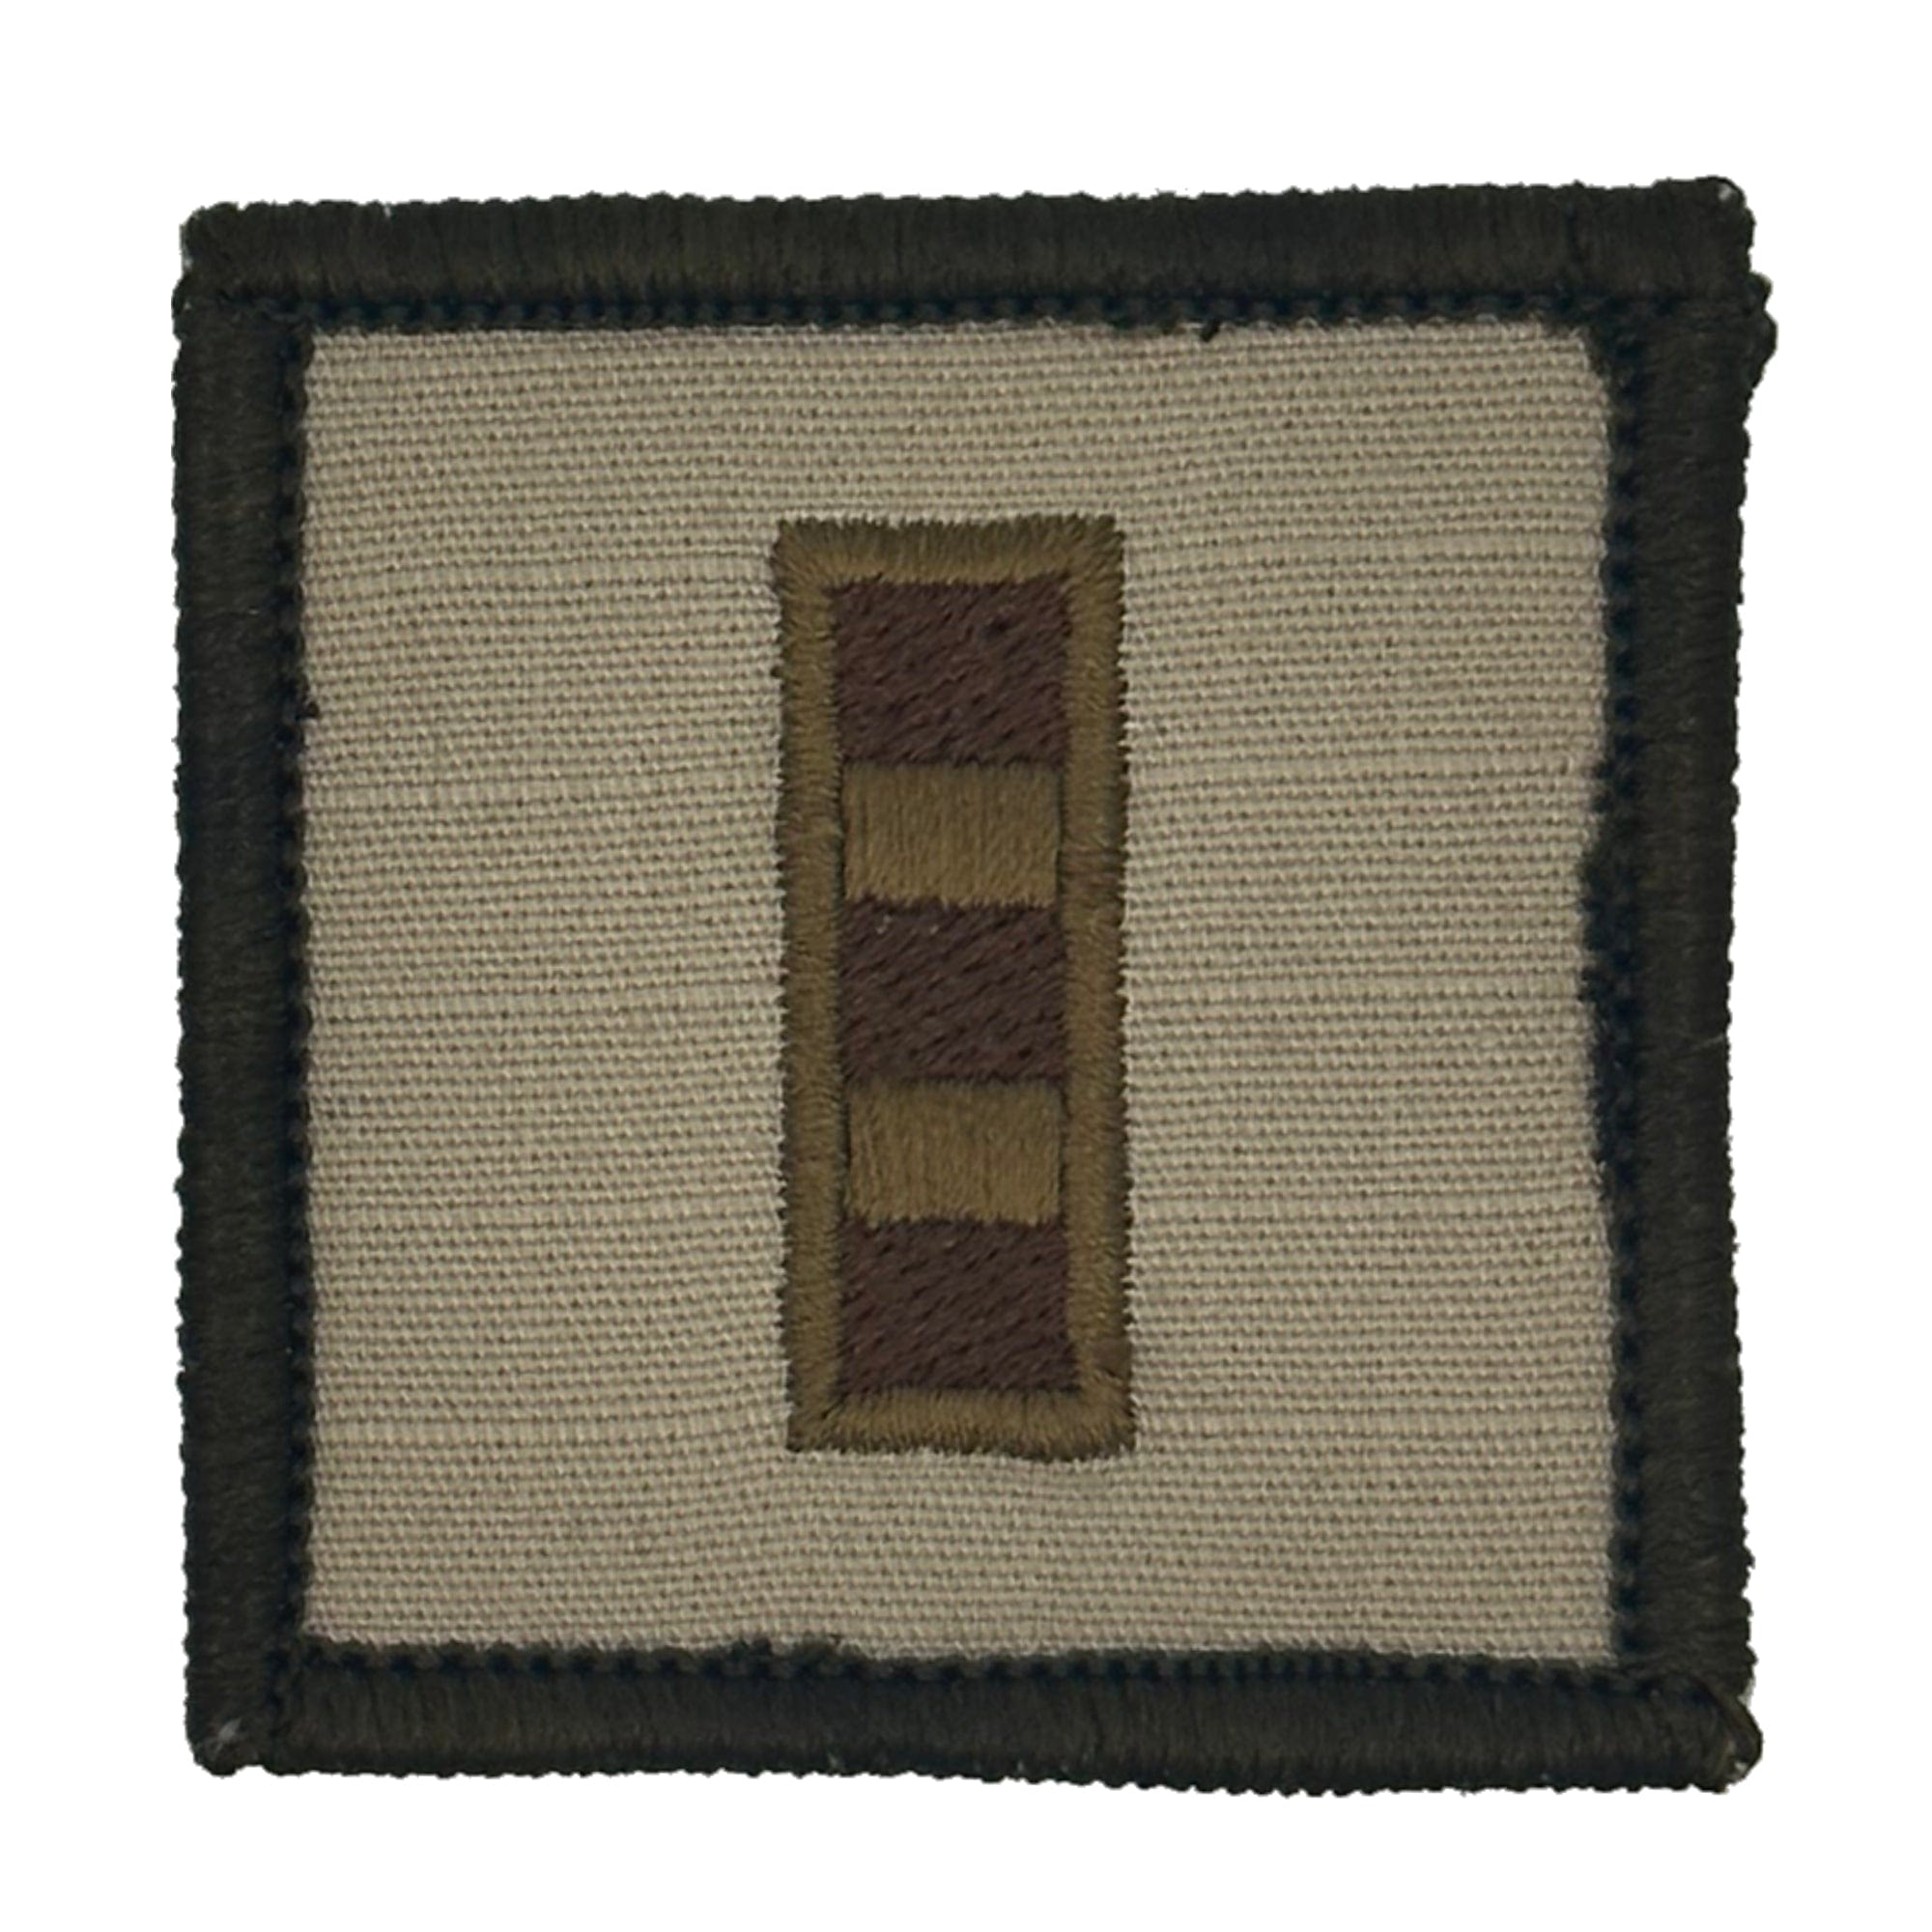 Tactical Gear Junkie Patches Desert Sand / Chief Warrant Officer 2 USMC Rank Insignia - 2x2 Patch